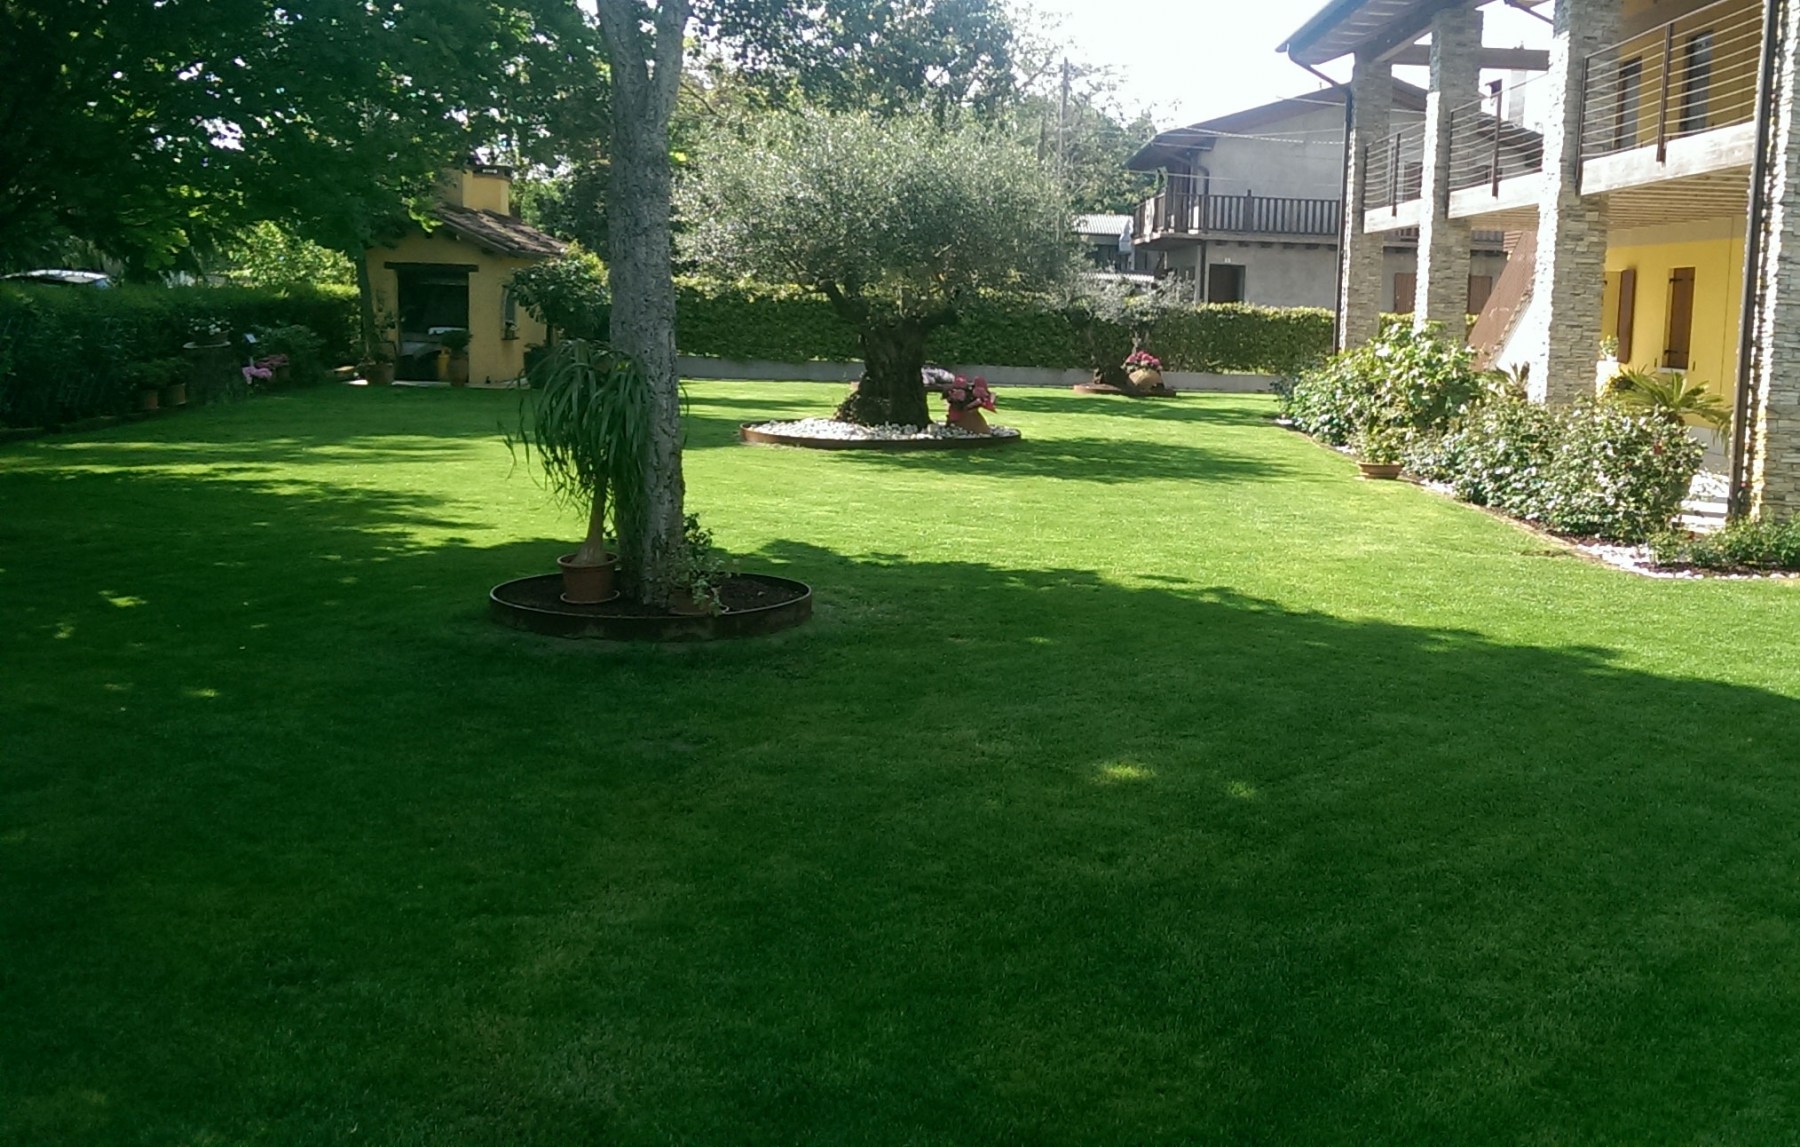 We provide landscaping<br />
services since 1978